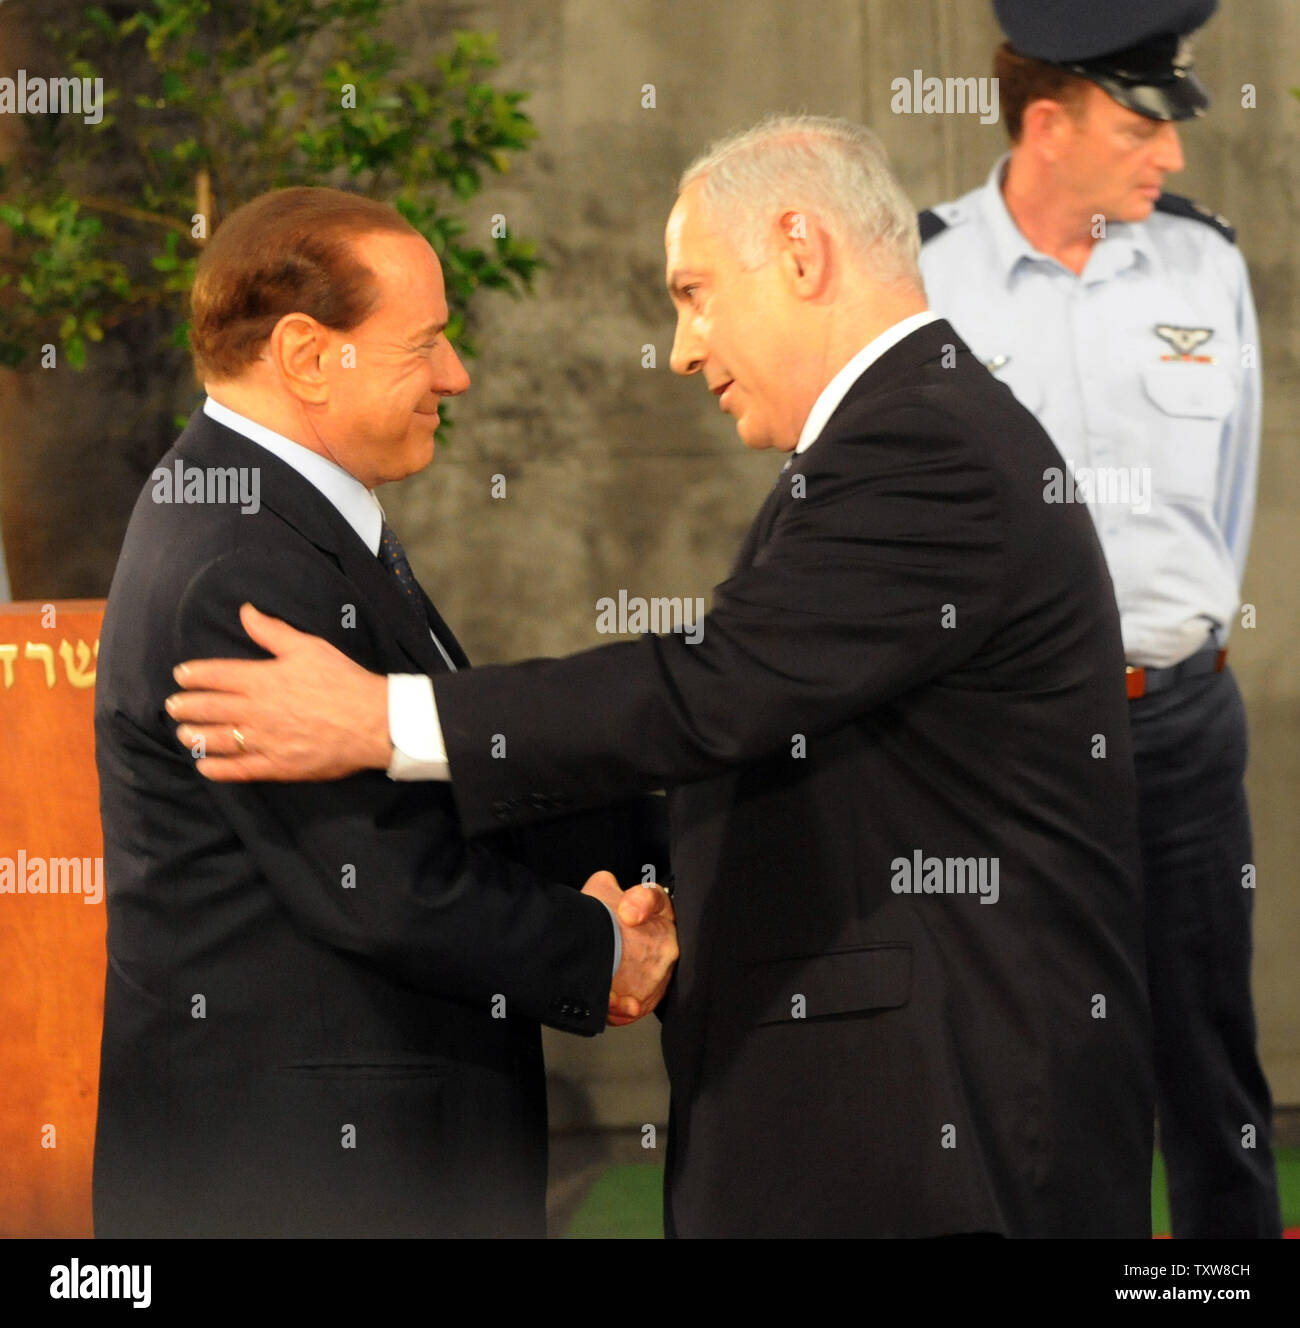 L-R:  Italian Prime Minister Silvio Berlusconi shakes hands with Israeli Prime Minister Benjamin Netanyahu during a welcoming ceremony at Netanyahu's Jerusalem office, February 1, 2010. Prime Minister Berlusconi is in Israel for a three- day visit.   UPI/Debbie Hill Stock Photo